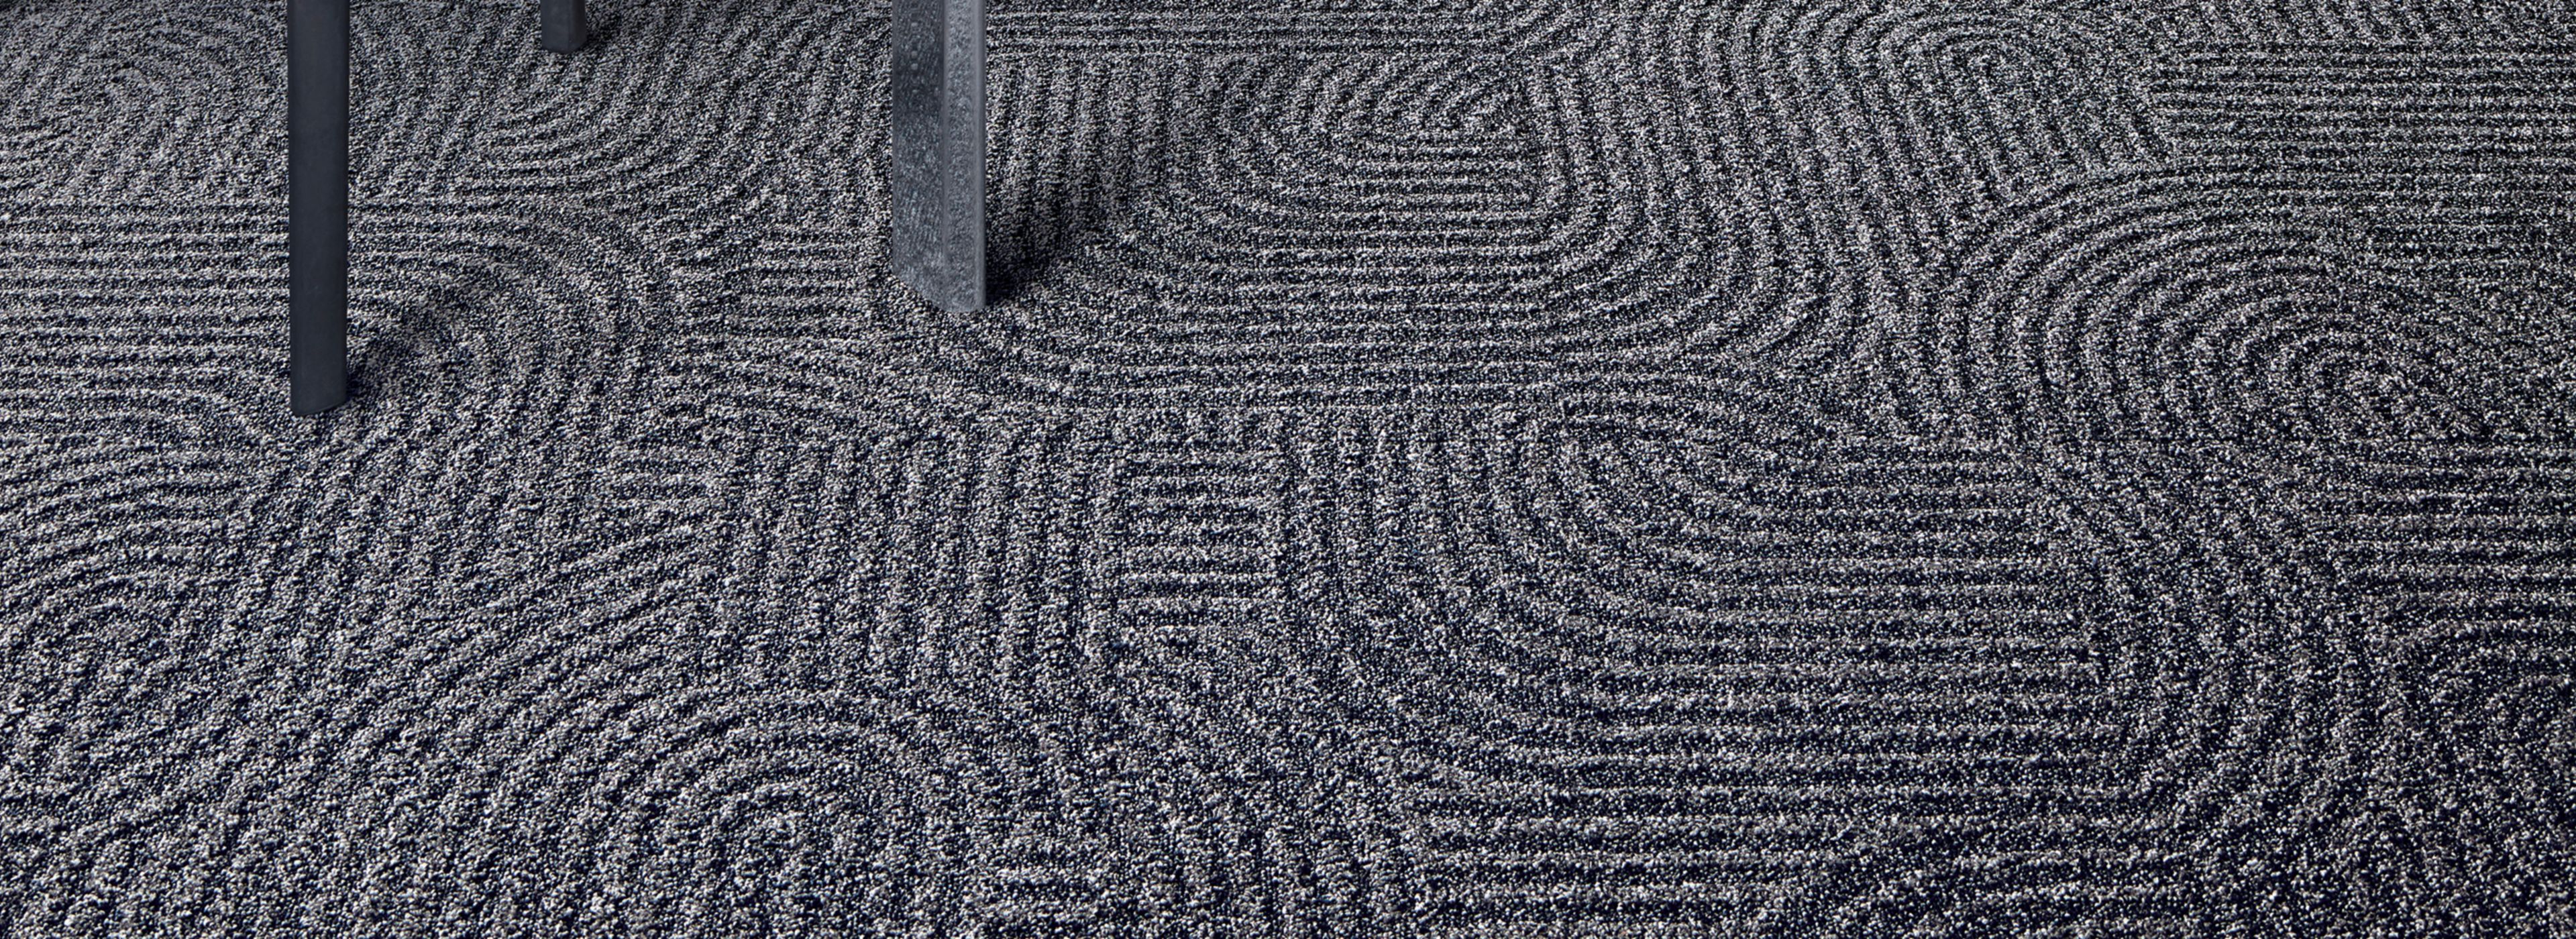 Interface Step this Way carpet tile in office common area with tree número de imagen 1